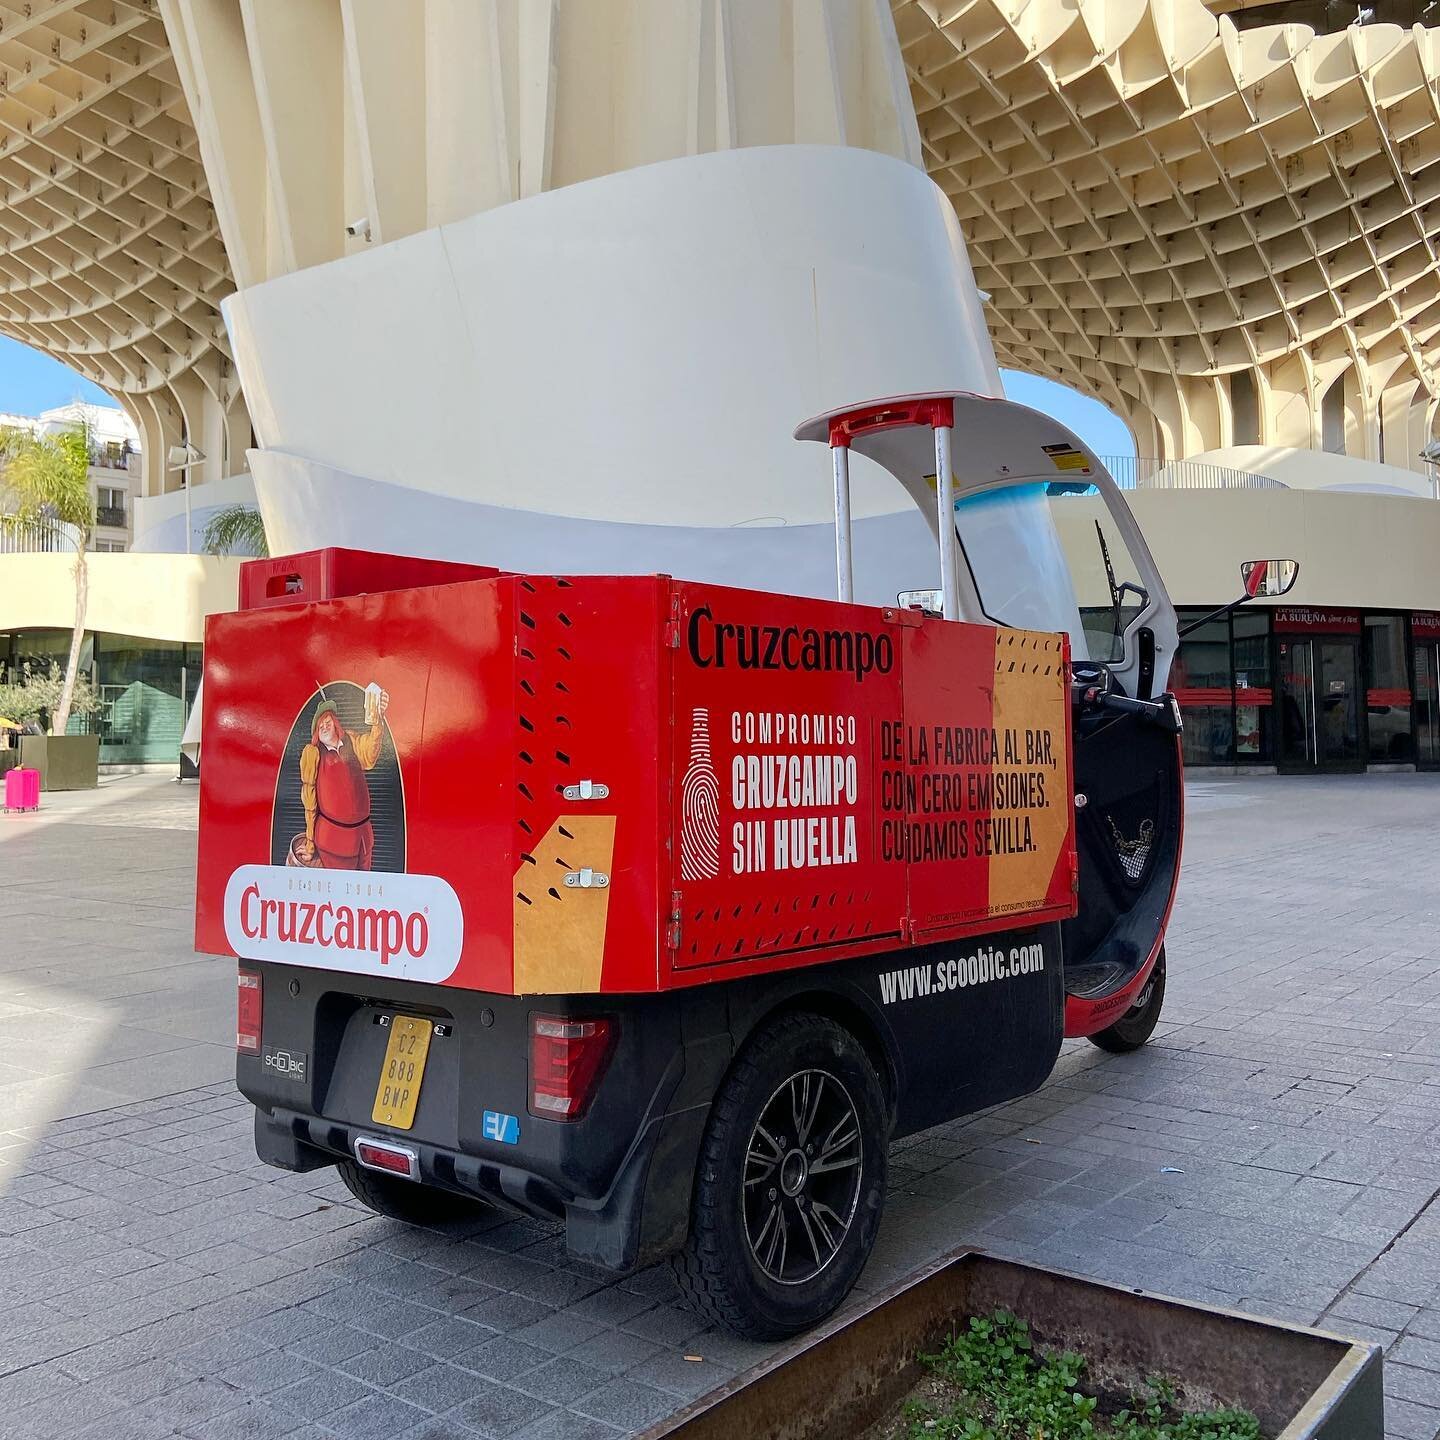 If there is one brand that has won the visibility competition in @seville it&rsquo;s @cruzcampo. From bar sponsorship to electric delivery vehicles, they rule the city. Their factory restaurant/bar on the outskirts of town is worth a visit. The beer 